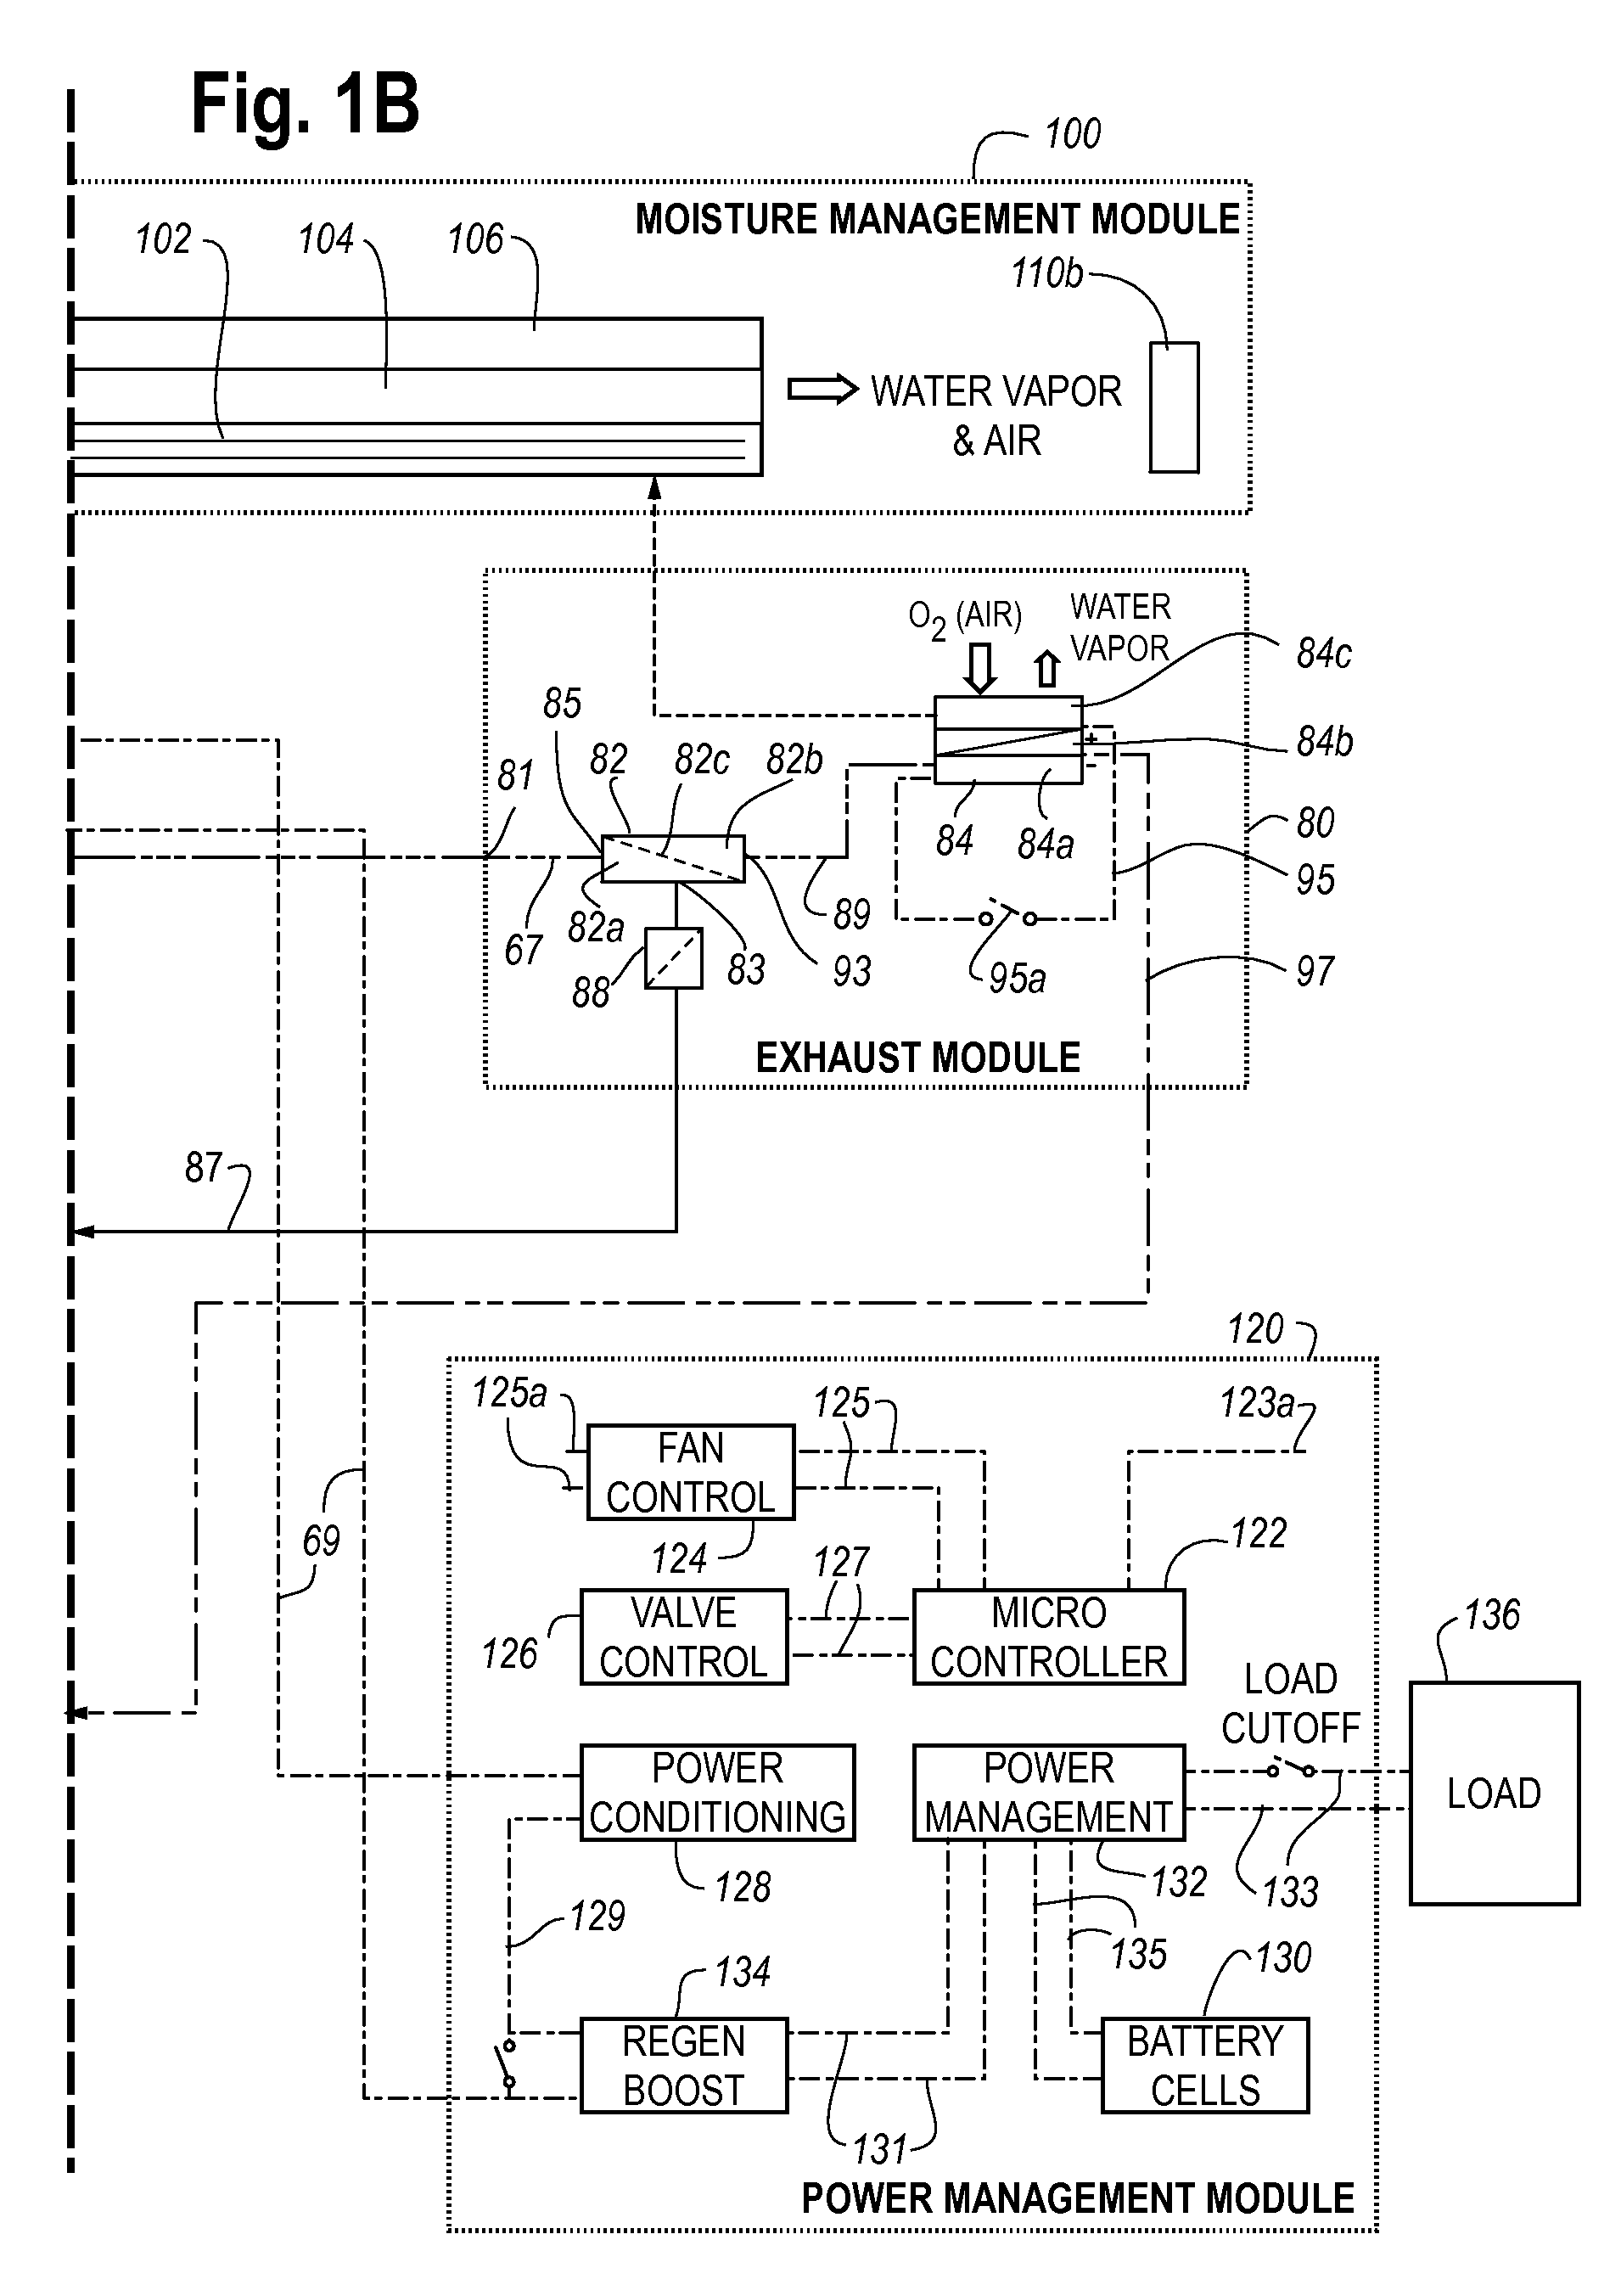 Passive-pumping liquid feed fuel cell system